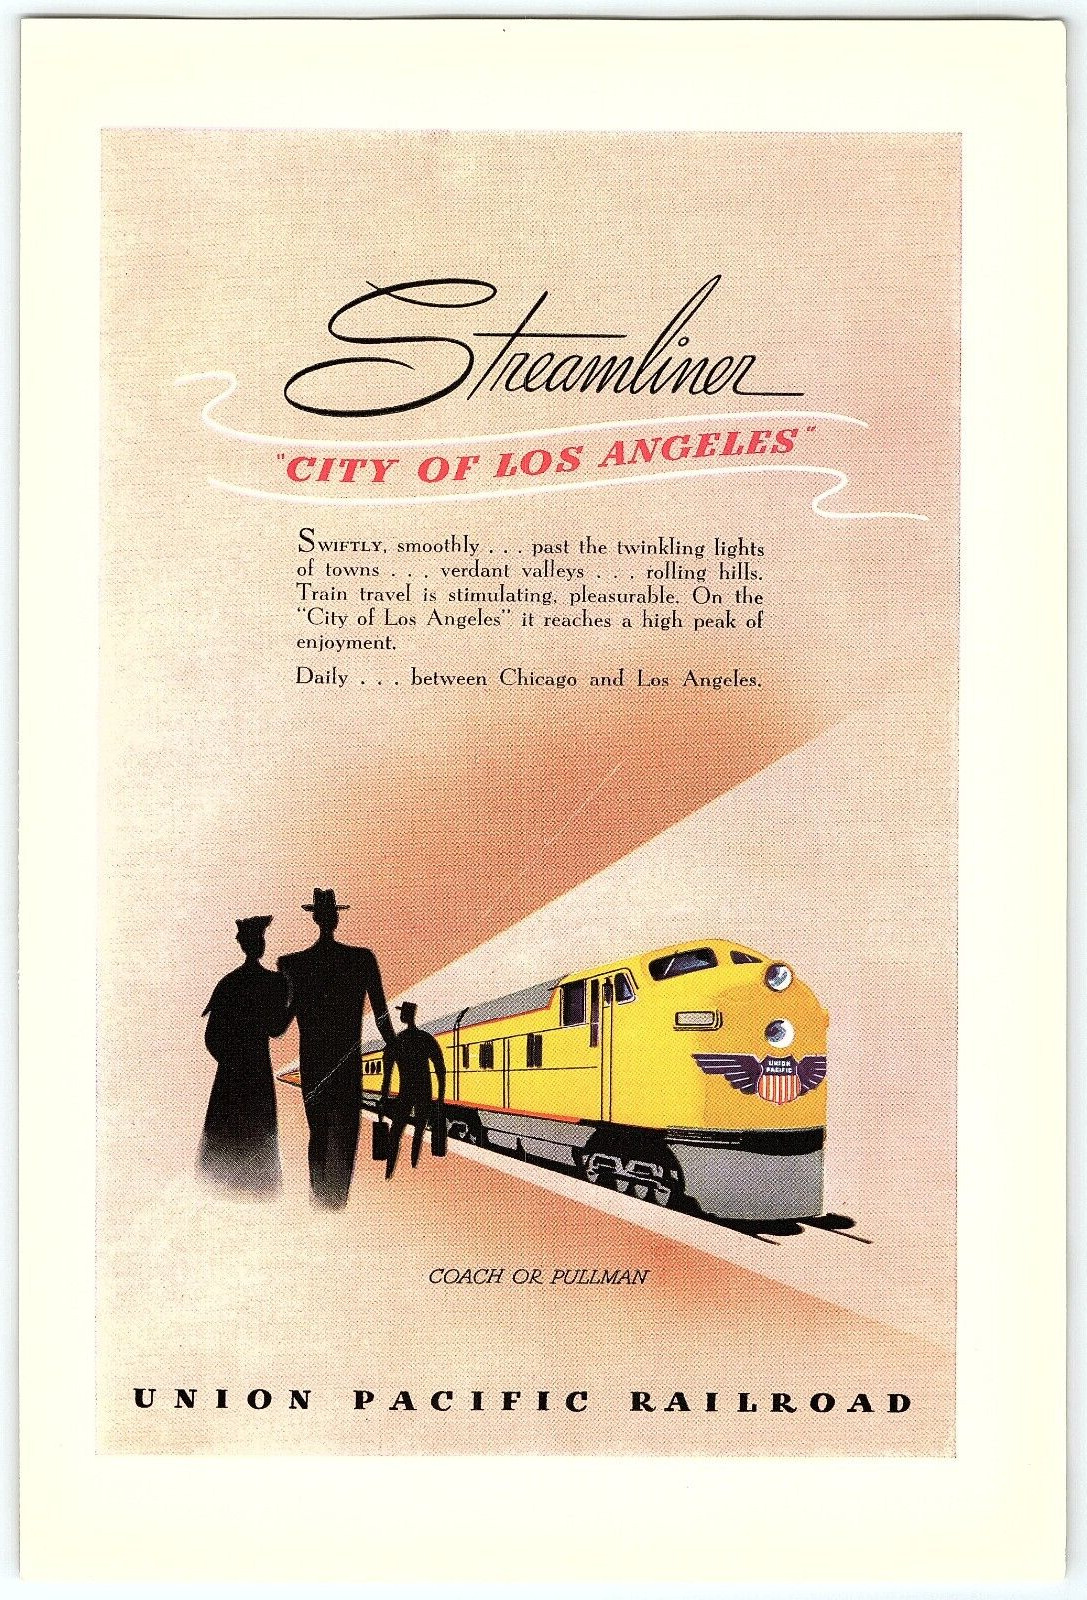 1940s UNION PACIFIC RAILROAD CITY OF LOS ANGELES STREAMLINER PRINT AD Z4249